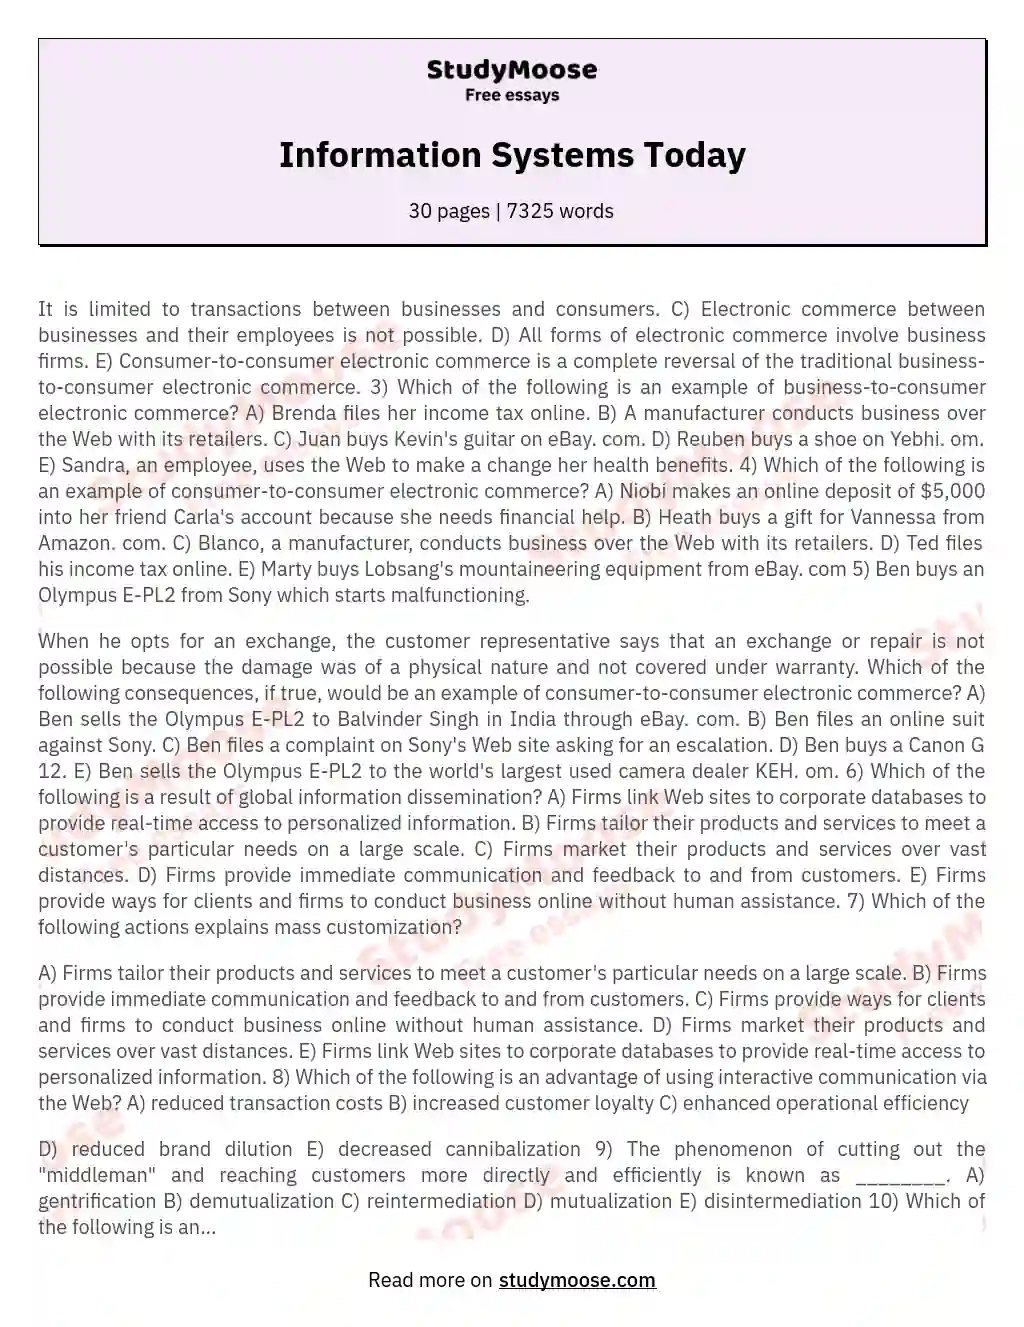 Information Systems Today essay